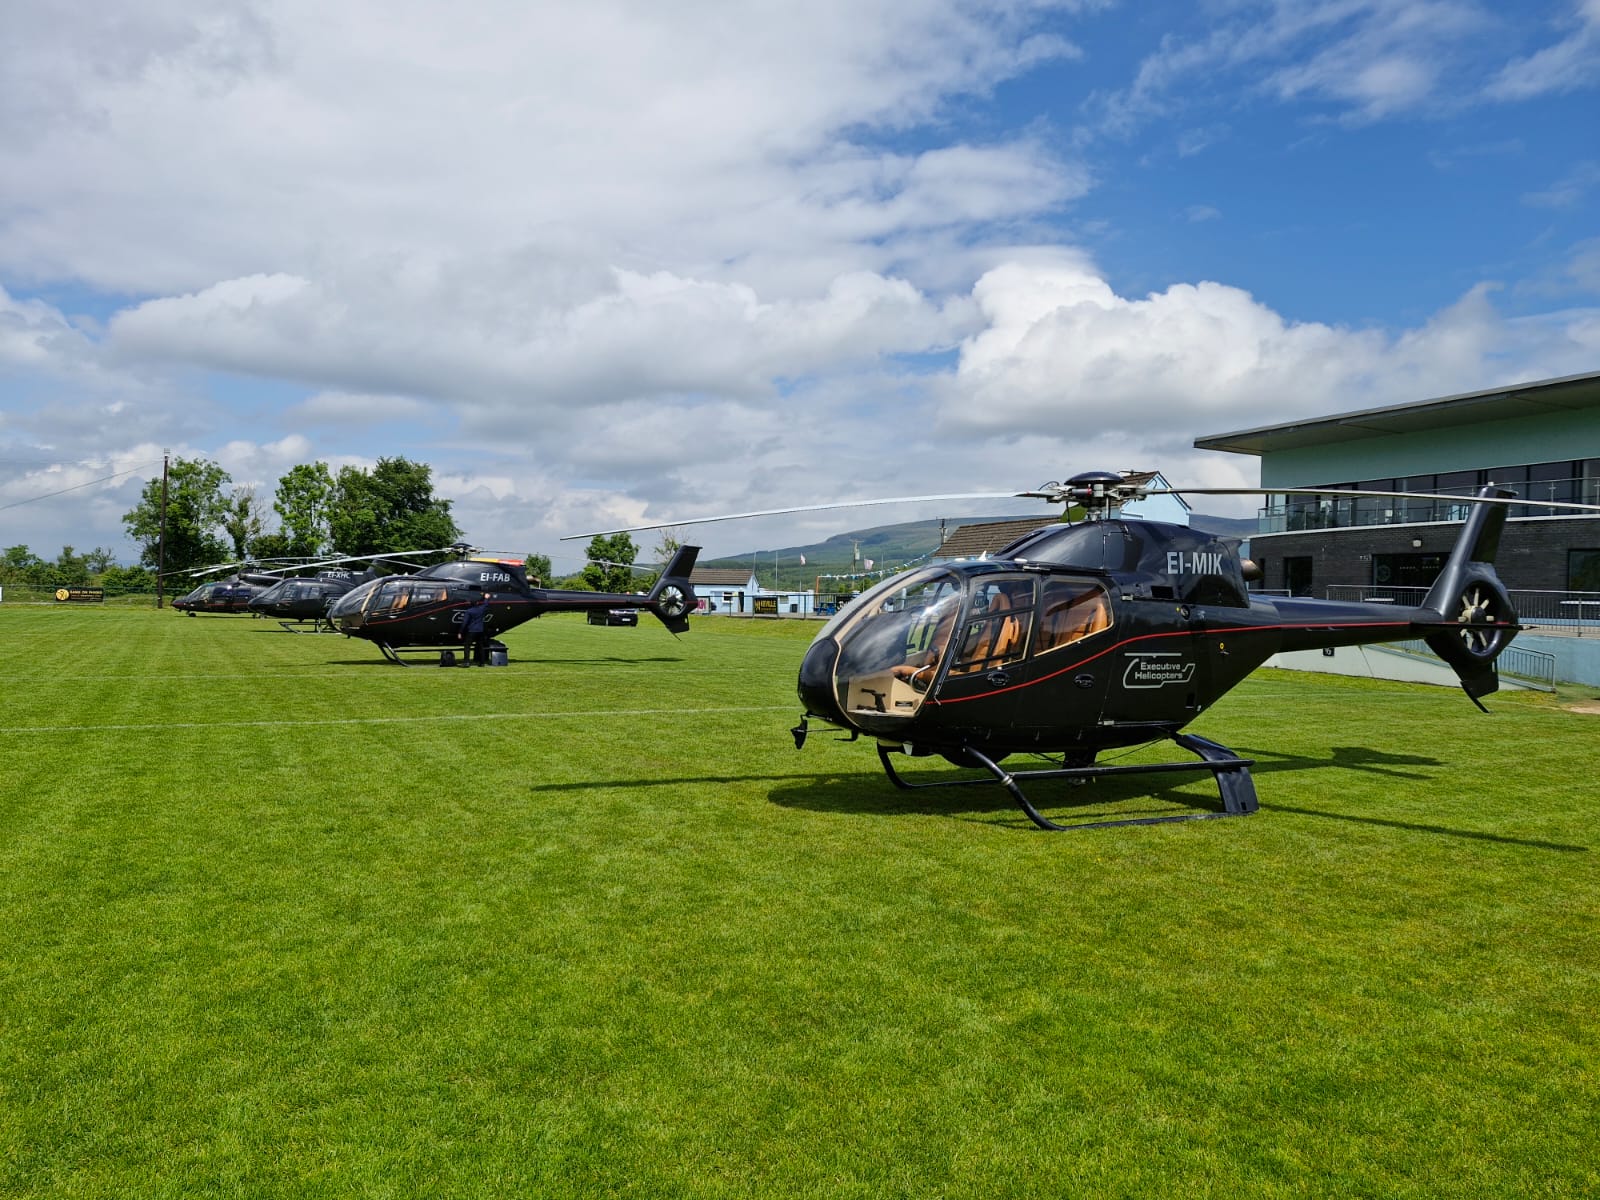 Fleet of Helicopters the lenght of Ireland